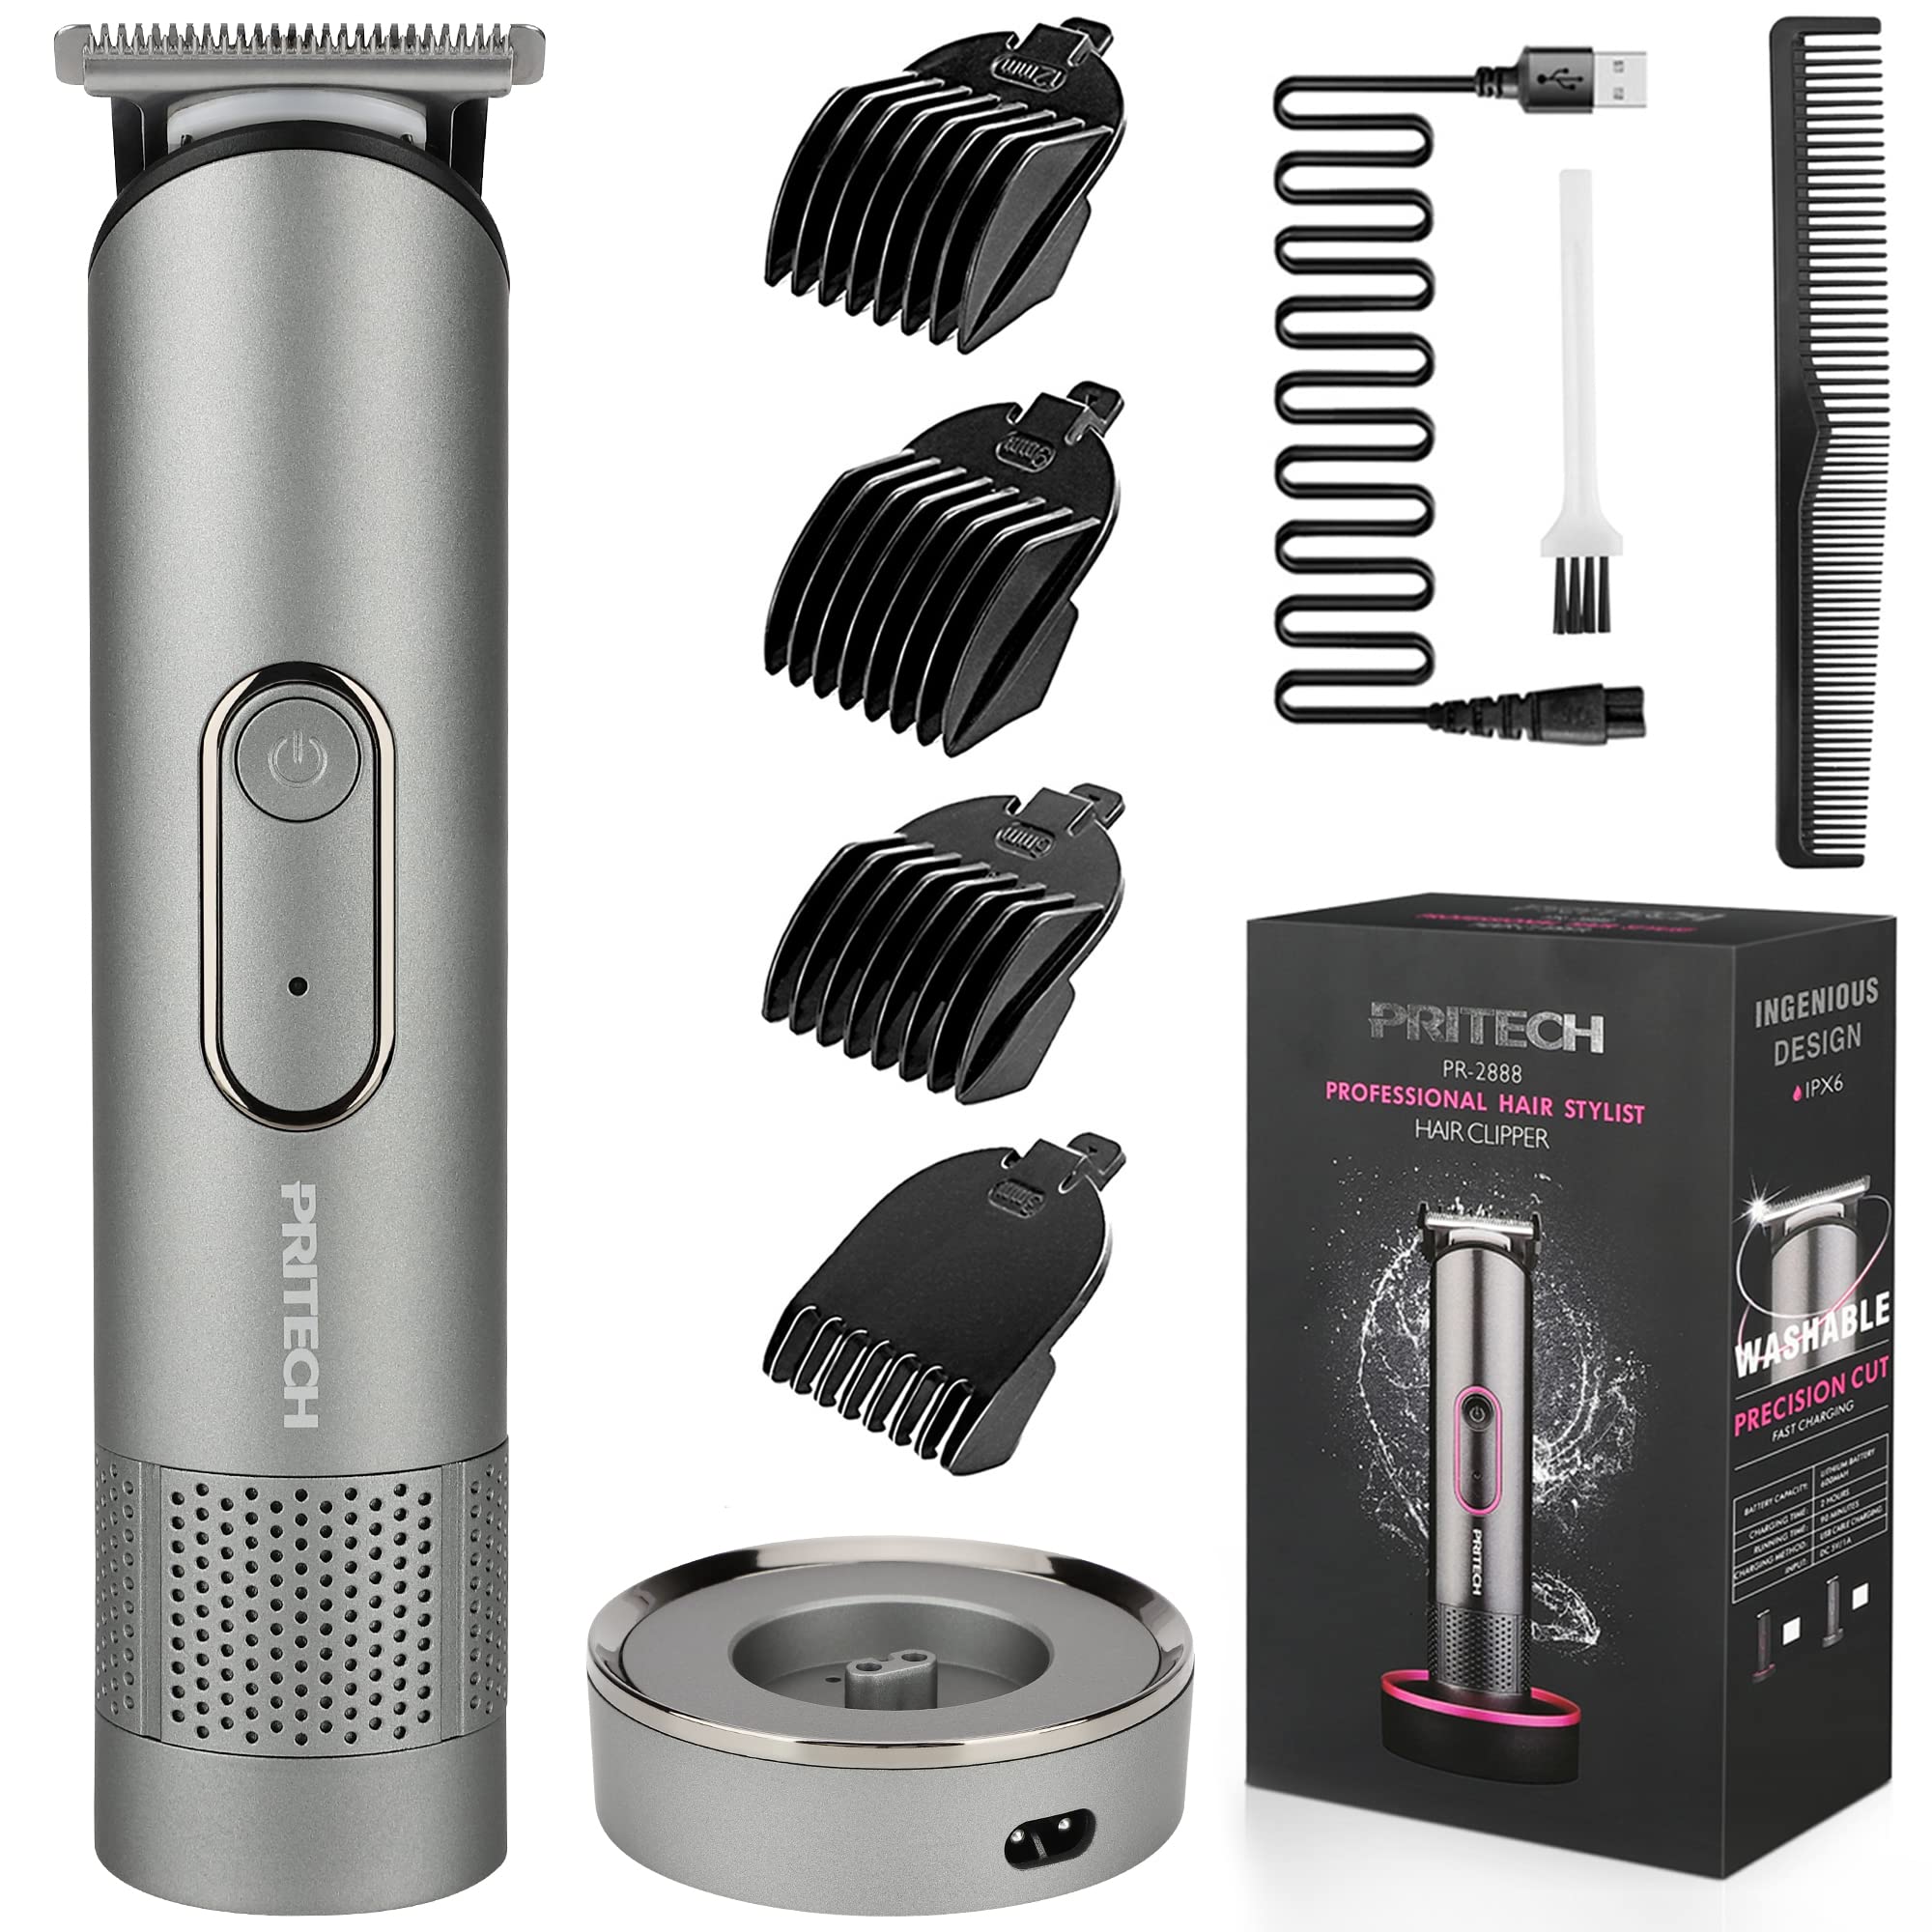 PRITECH Hair Trimmer for Men, Women and Kids, Rechargeable Hair Clippers,  Beard Trimmer, Home Hair Cut Kit, Cordless Barber Grooming Sets, Waterproof  Body Trimmer, Groin Hair Trimmer, Nebula Gray Gray/Silver